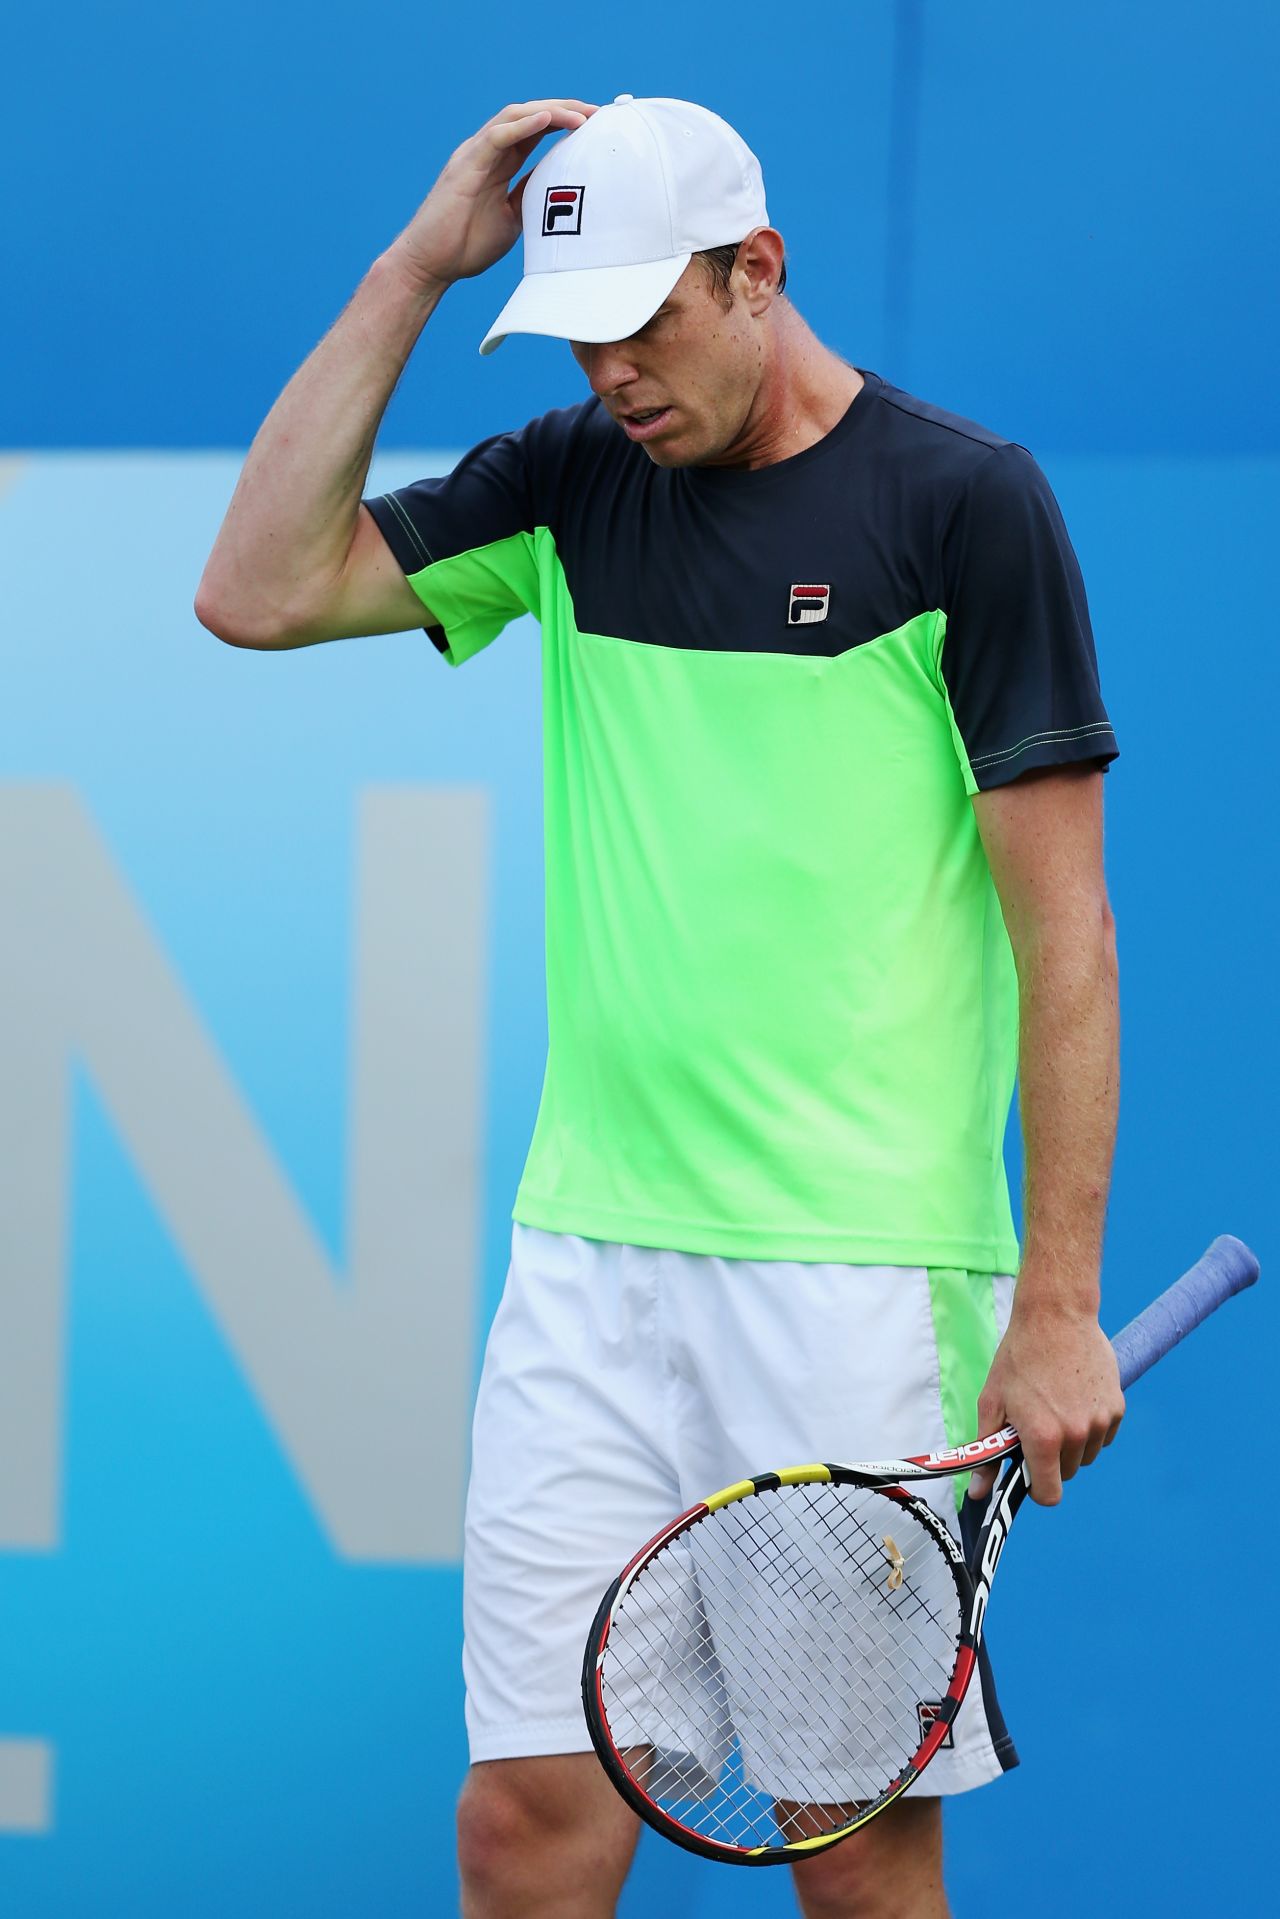 Canada's rise comes at a time when U.S. men -- including the pictured Sam Querrey -- are slumping. March 2013 marked the first time since the rankings were introduced in 1973 that a U.S. player wasn't the top-ranked North American male. Instead, the honor fell to Raonic who has remained the continent's top male player ever since.